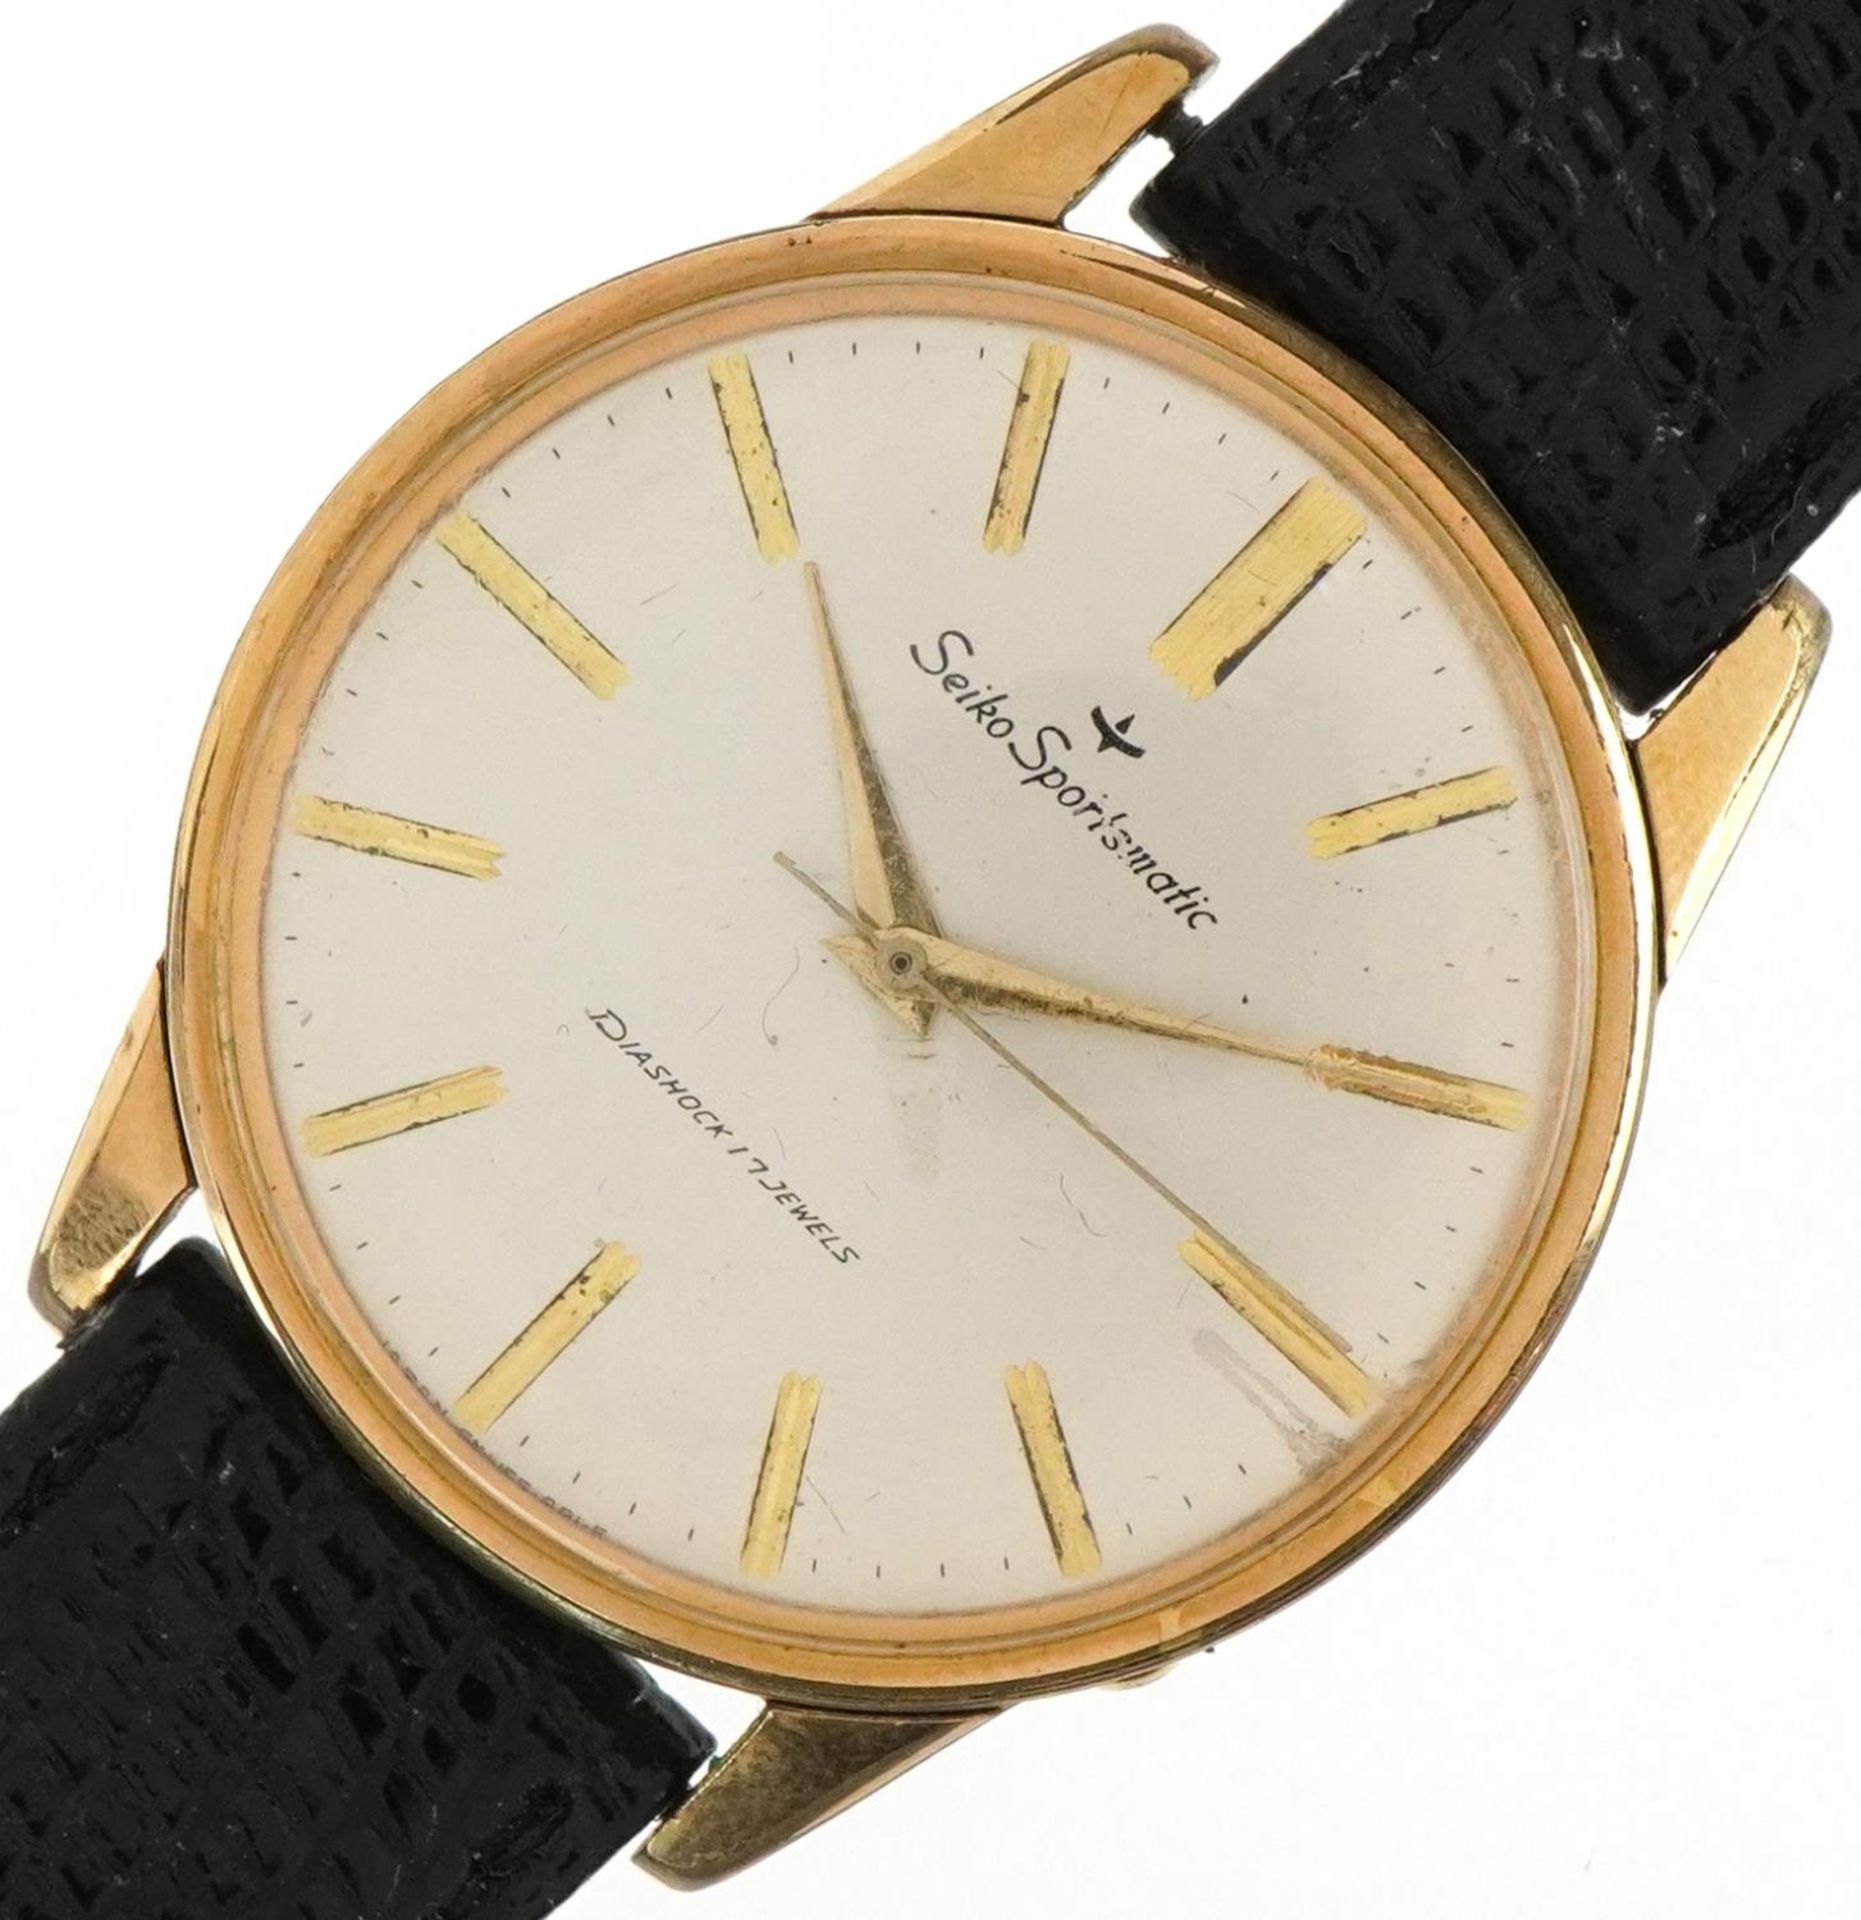 Seiko, gentlemen's Seiko Sportsmatic automatic wristwatch, model 15035, the movement numbered